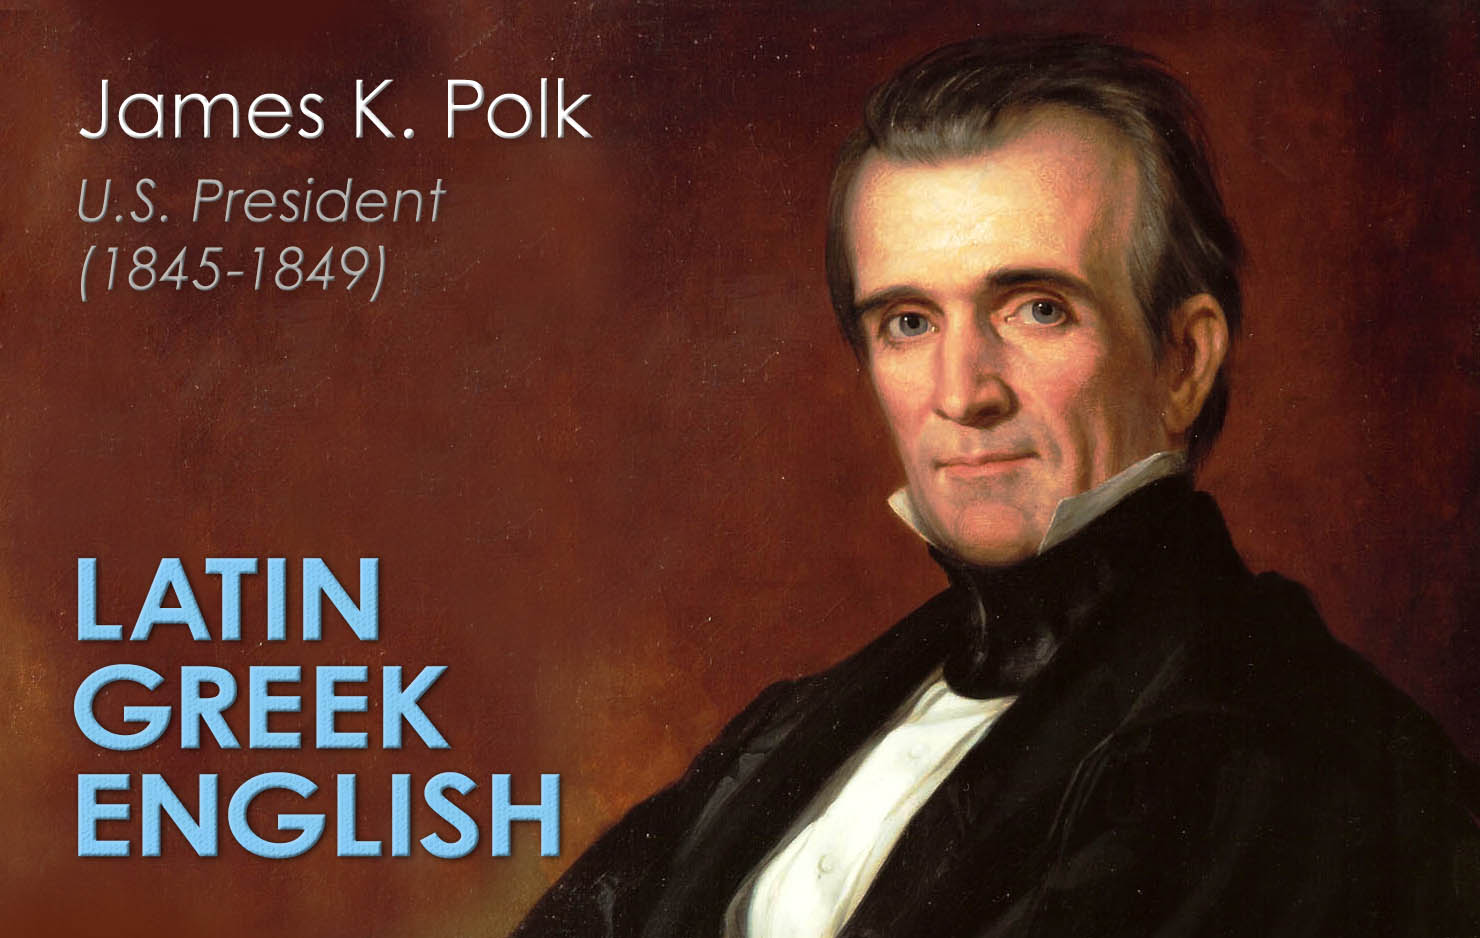 James K. Polk had no background in foreign languages upon entering college, but became proficient in classical languages and received honors in both Greek and Latin. The fact that President Polk had no proficiency in foreign languages upon entering college, but gave the welcoming address at graduation in Latin should encourage any student who believes he or she can’t learn a foreign language.